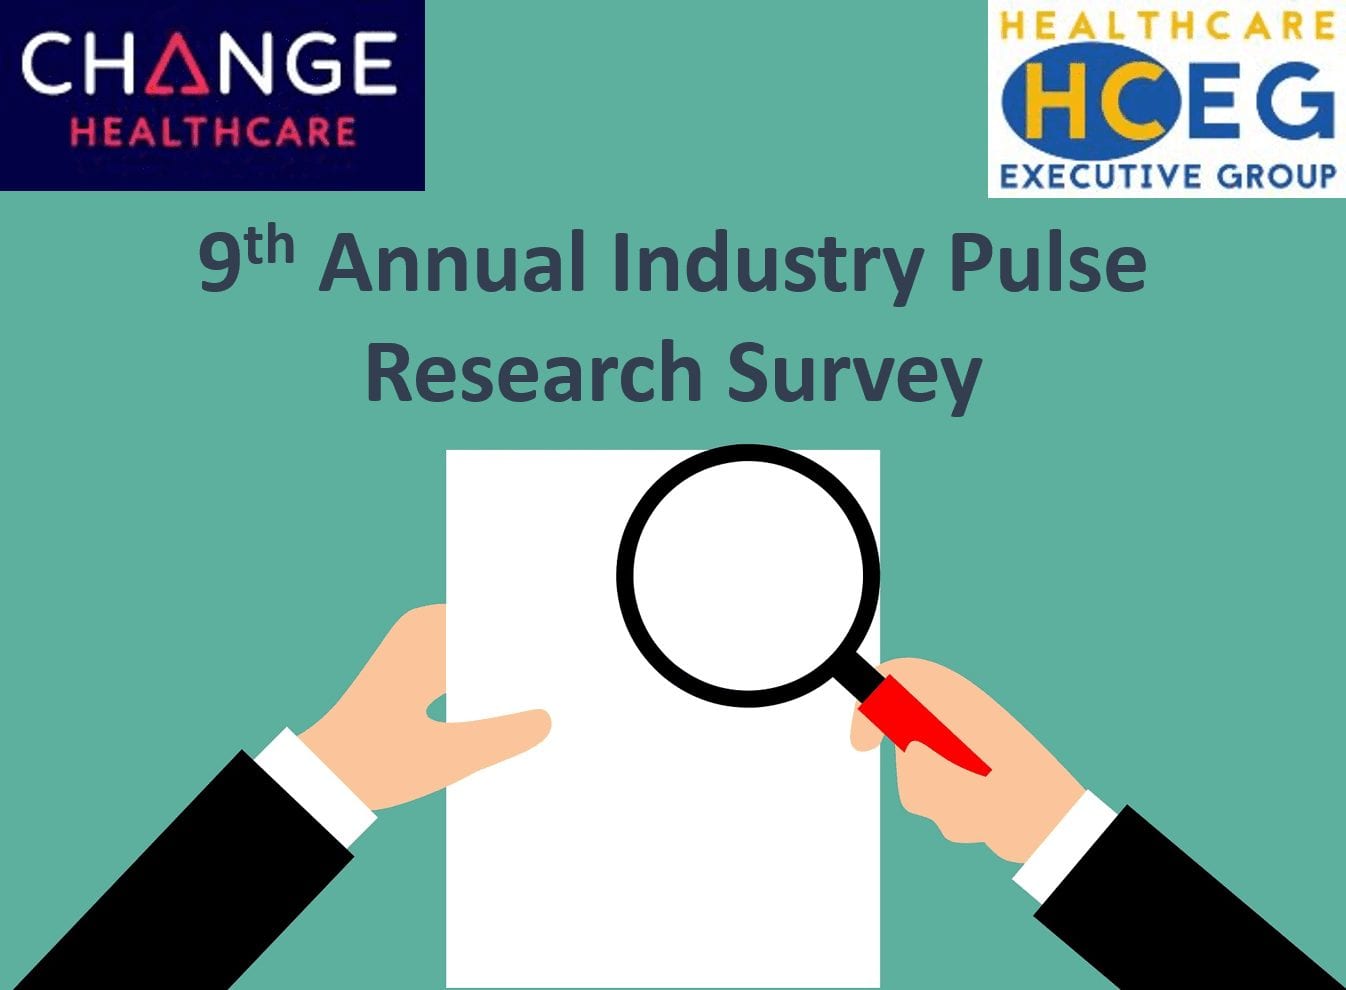 9th Annual Industry Pulse survey. 2019 HCEG Top 10 List. Top challenges, issues and opportunities facing healthcare leadership.